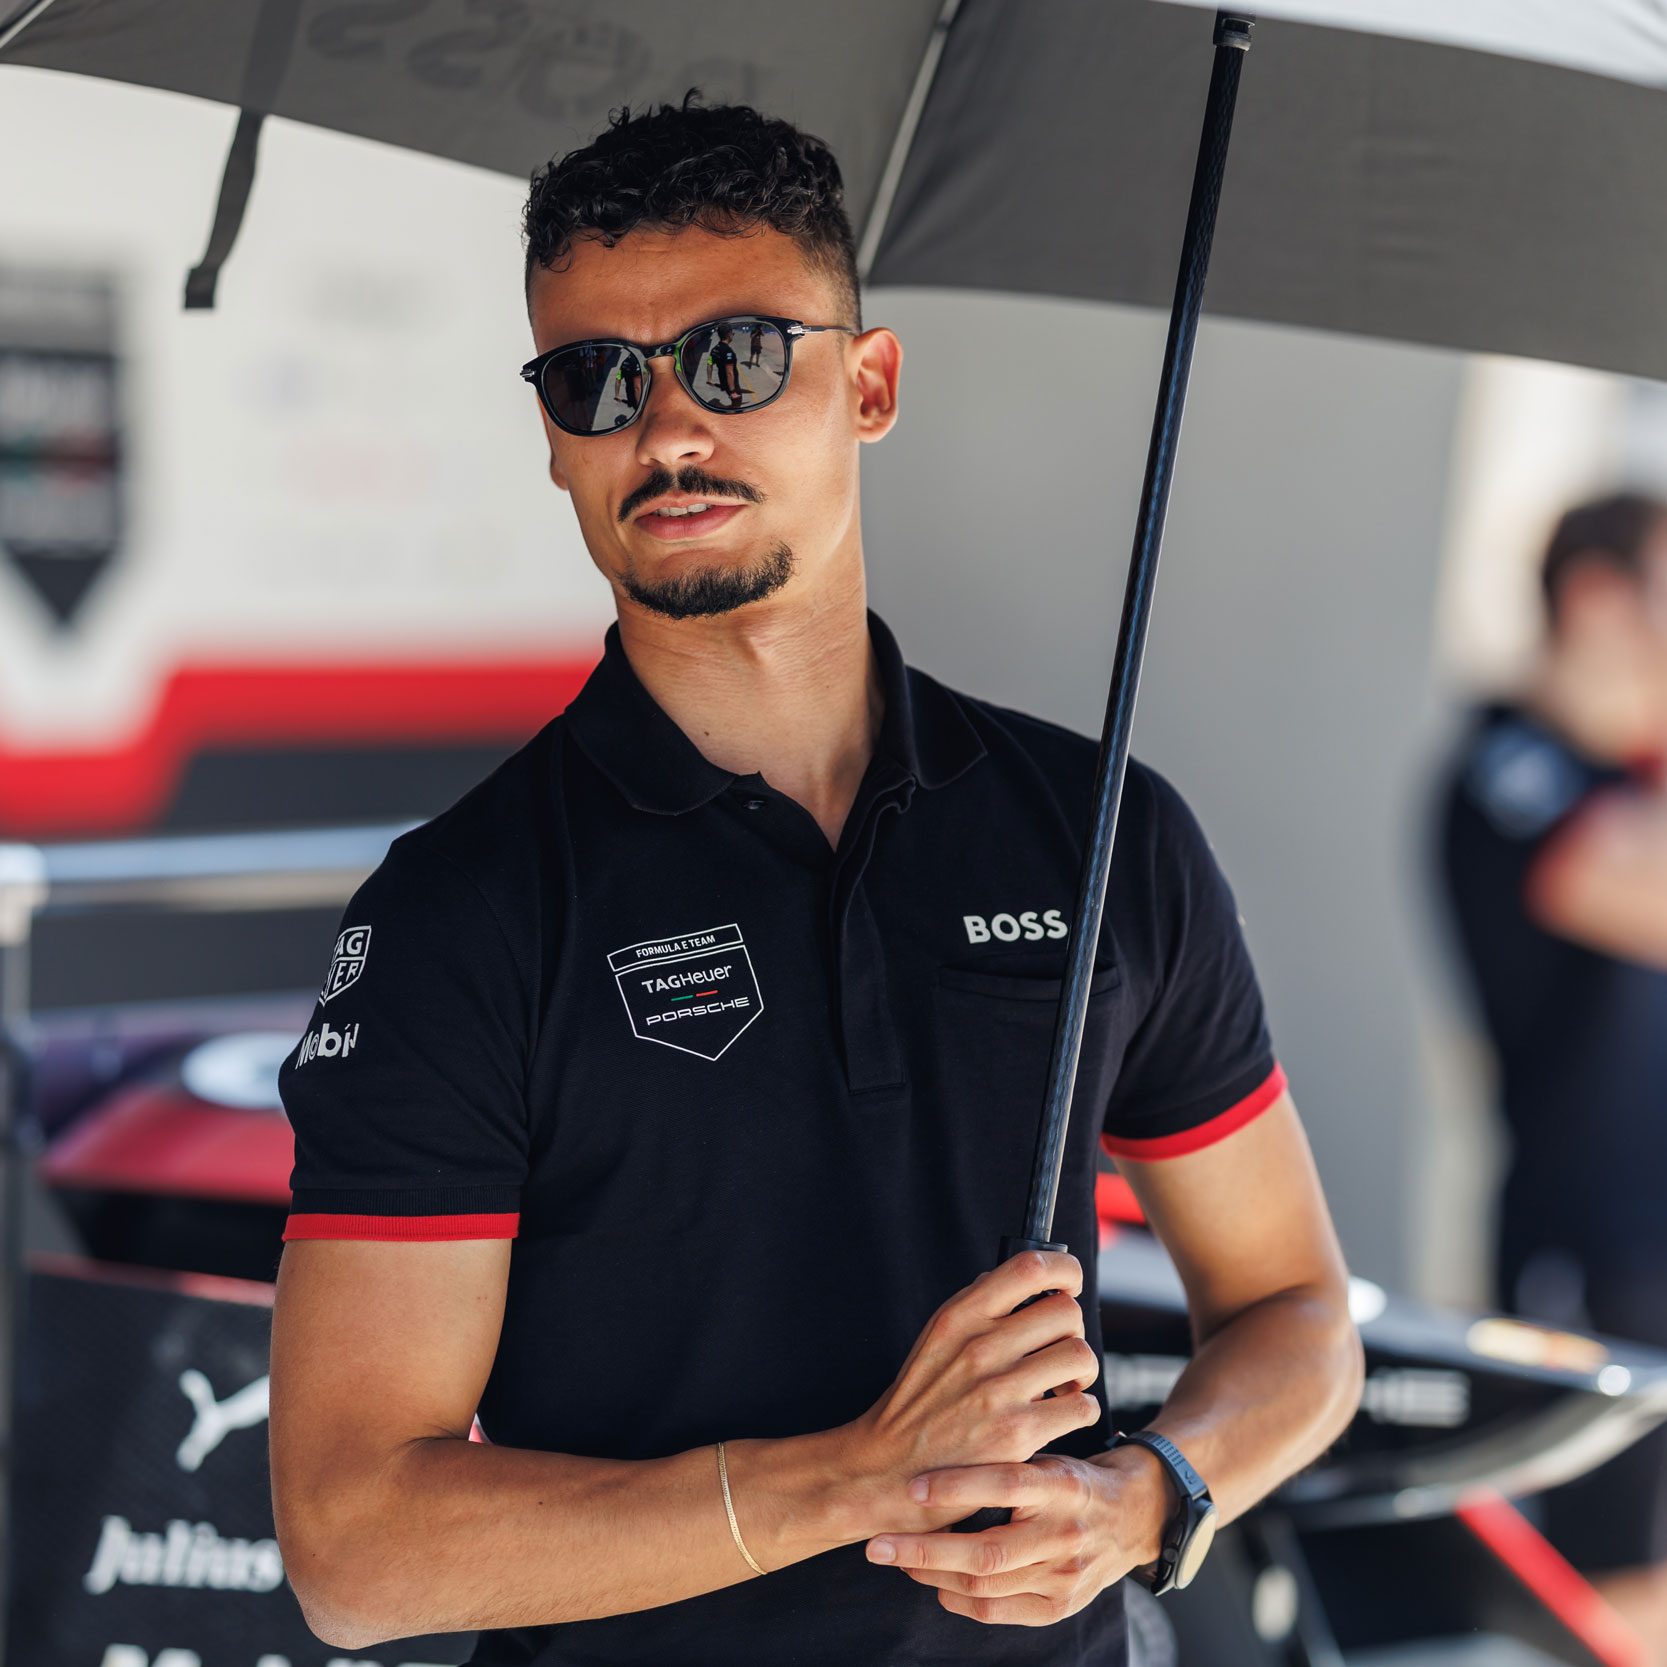 WEHRLEIN LANDS IN CHINA FOR FIRST-EVER SHANGHAI E-PRIX